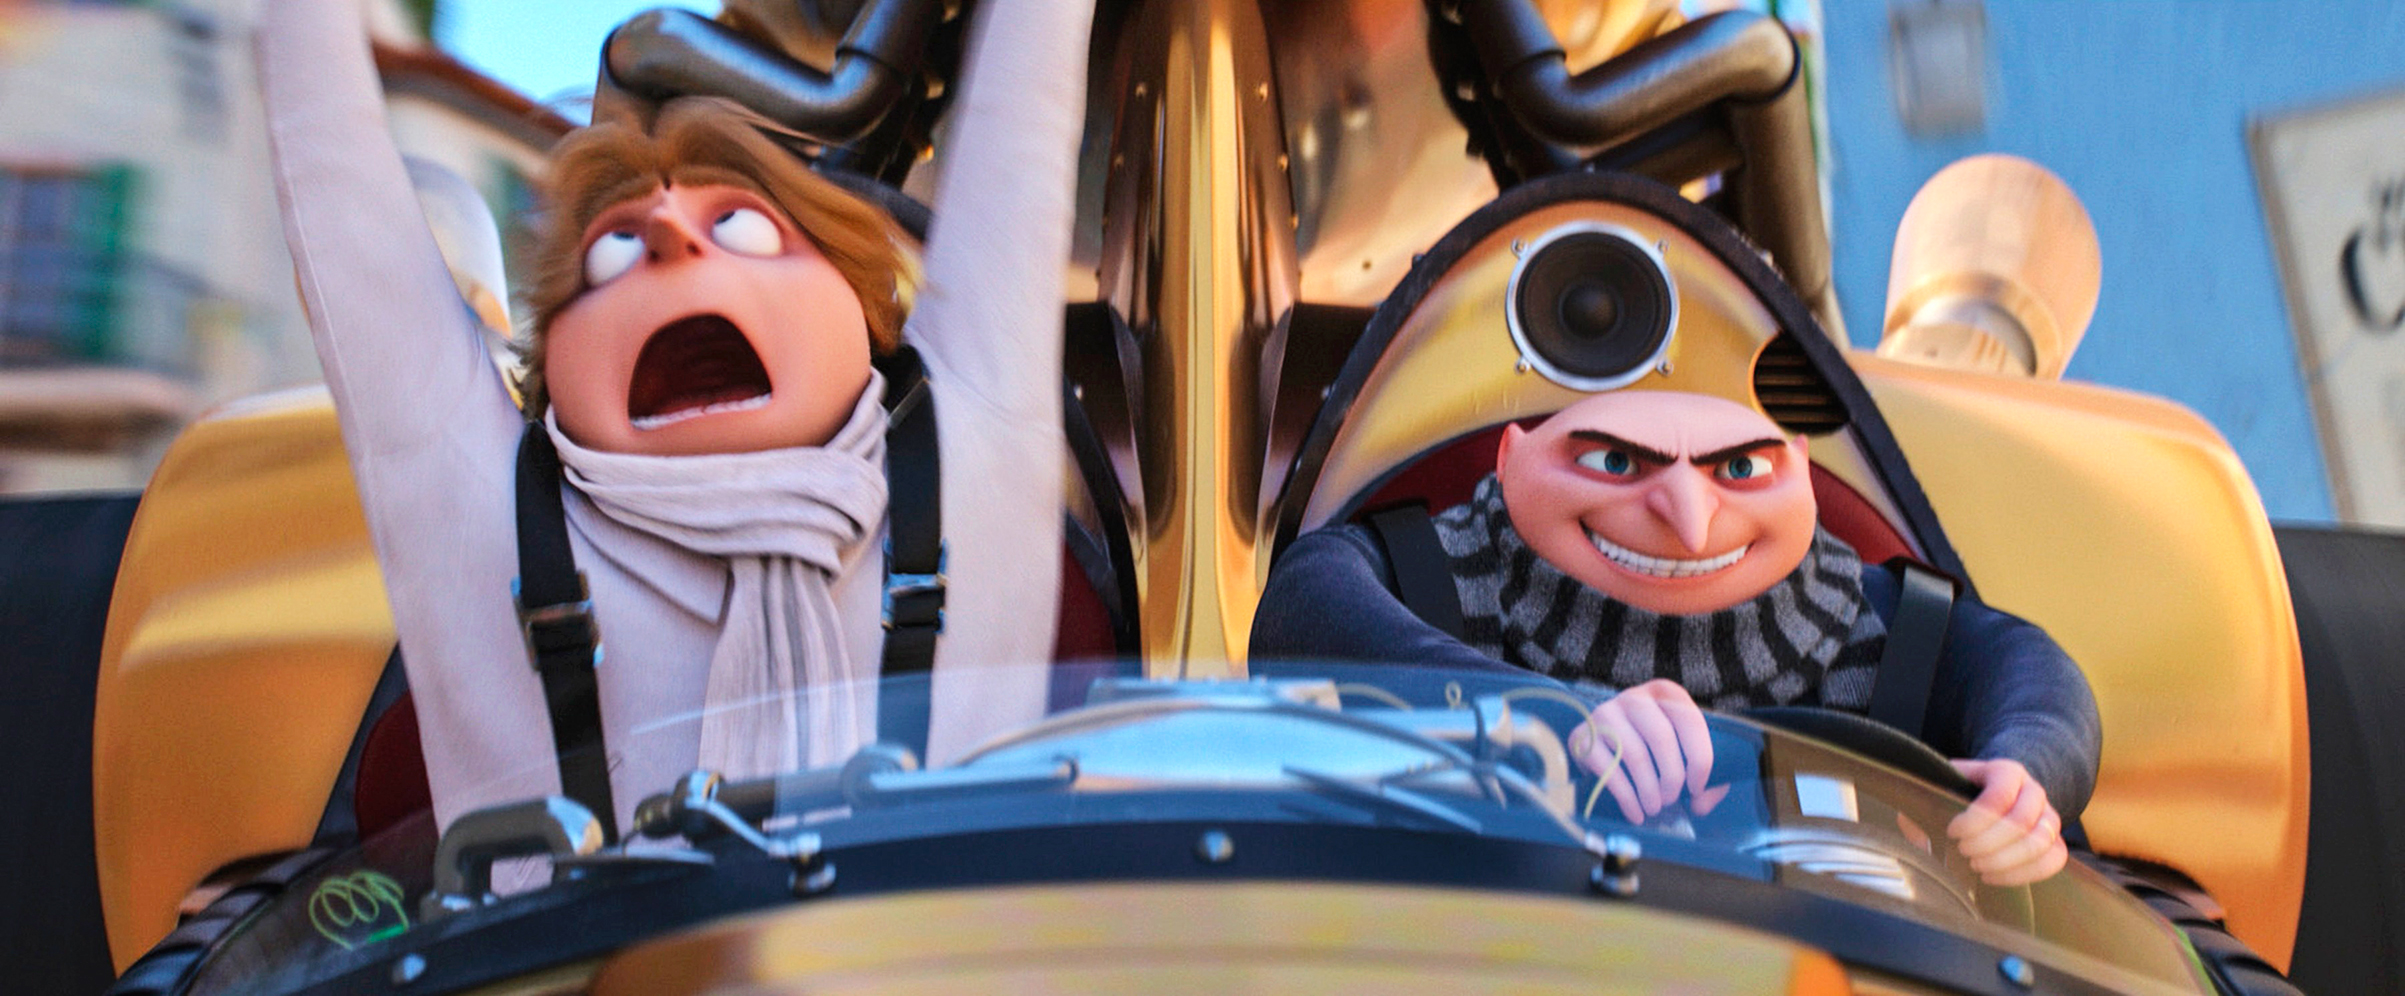 Twins Dru and Gru make for a dastardly duo in Despicable Me 3 (Universal)